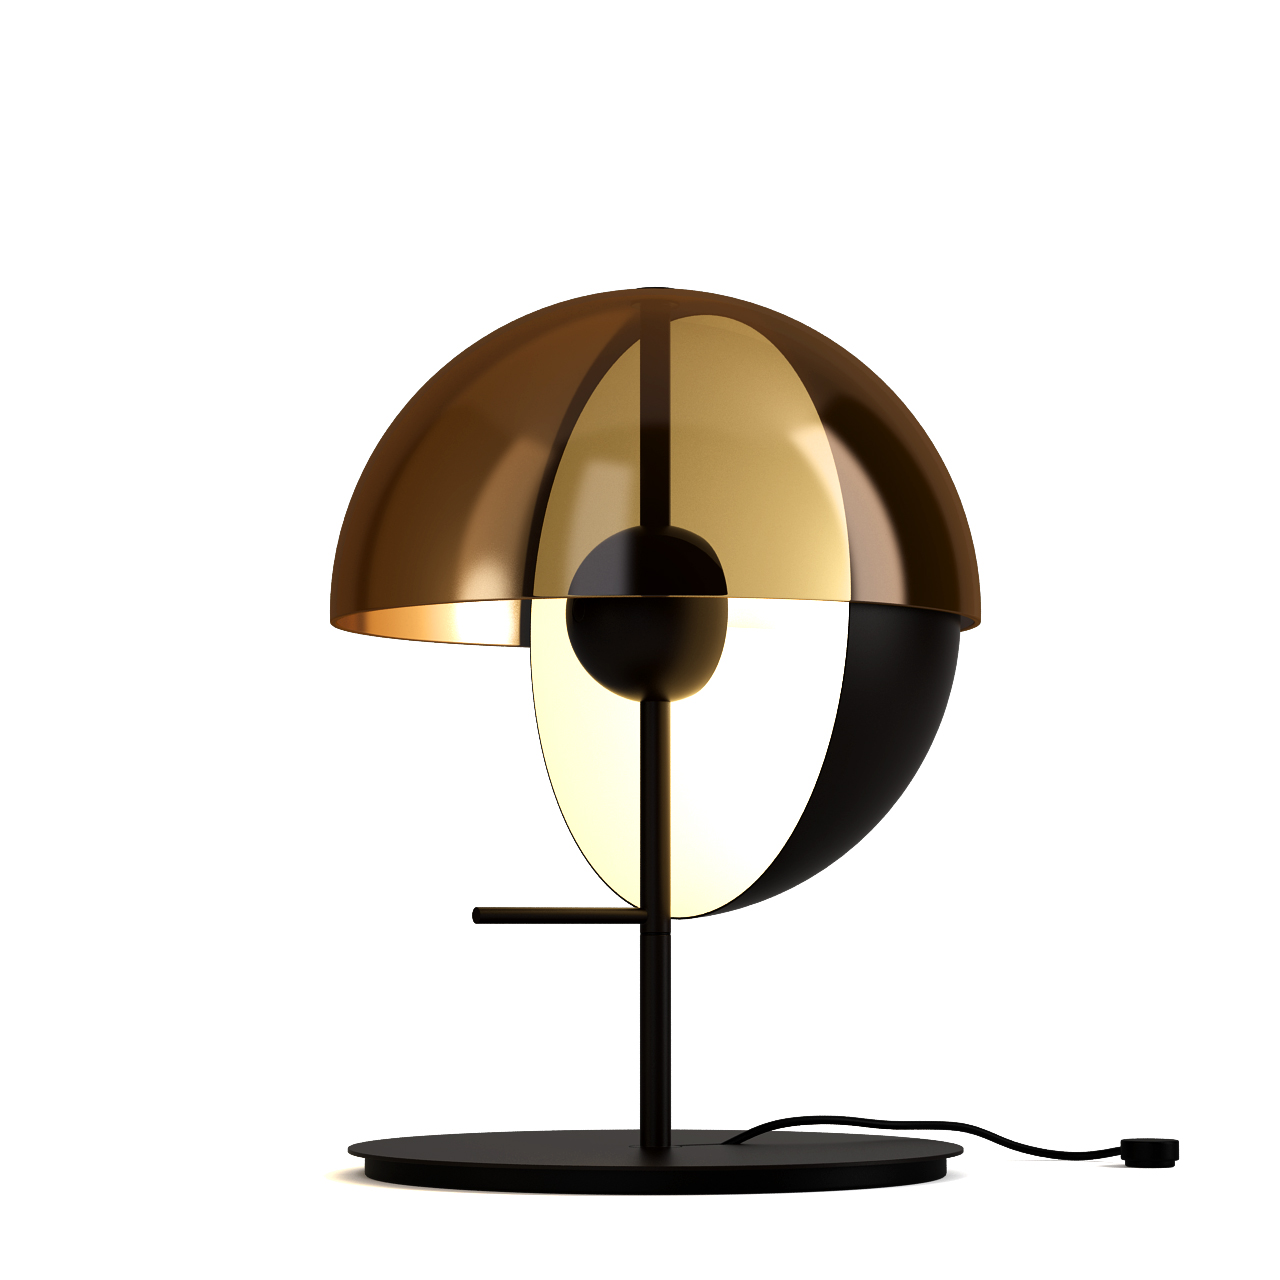 theia-table-lamp-by-marset.jpg